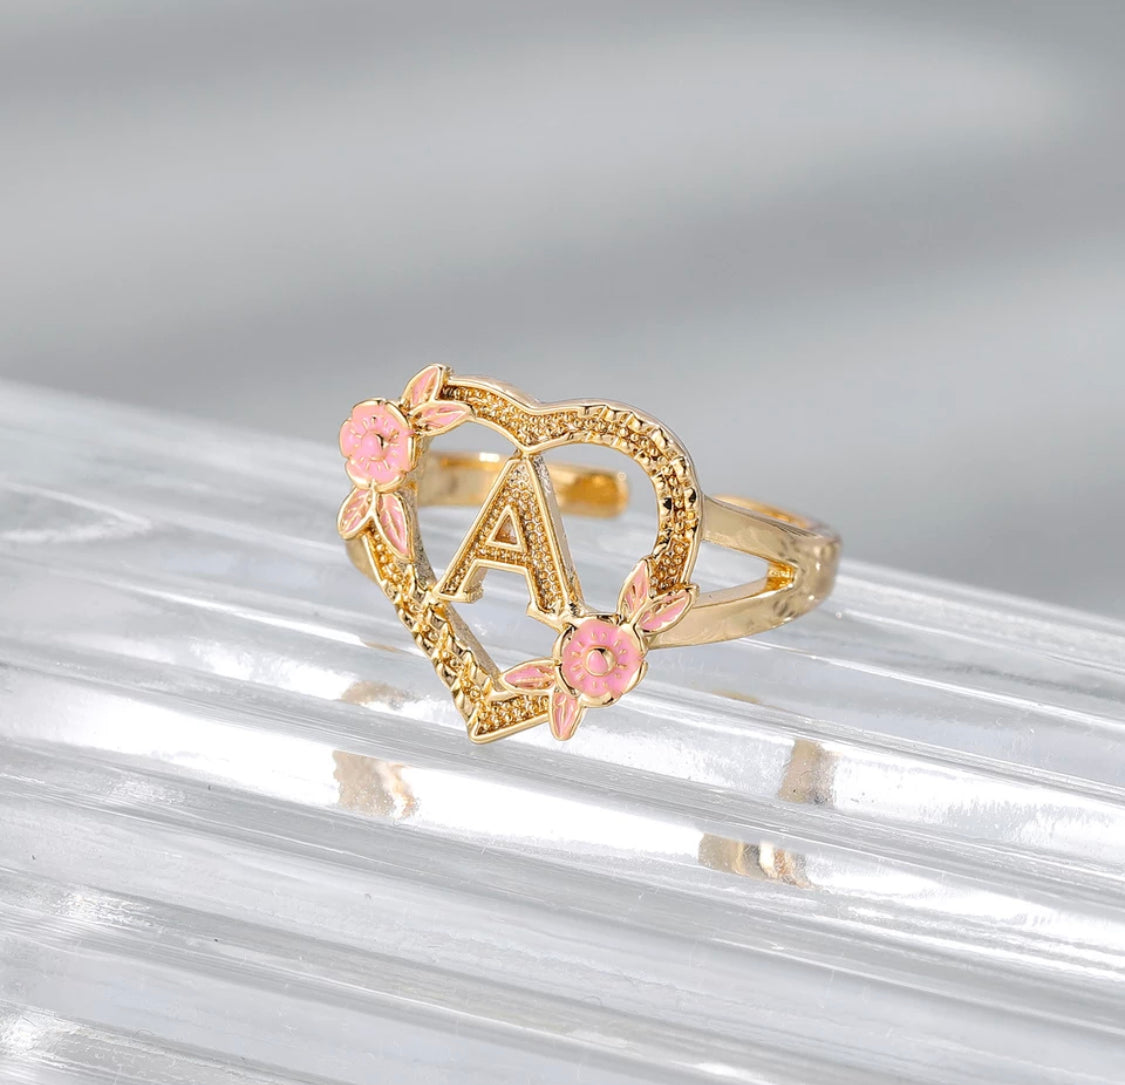 The Layla initial ring